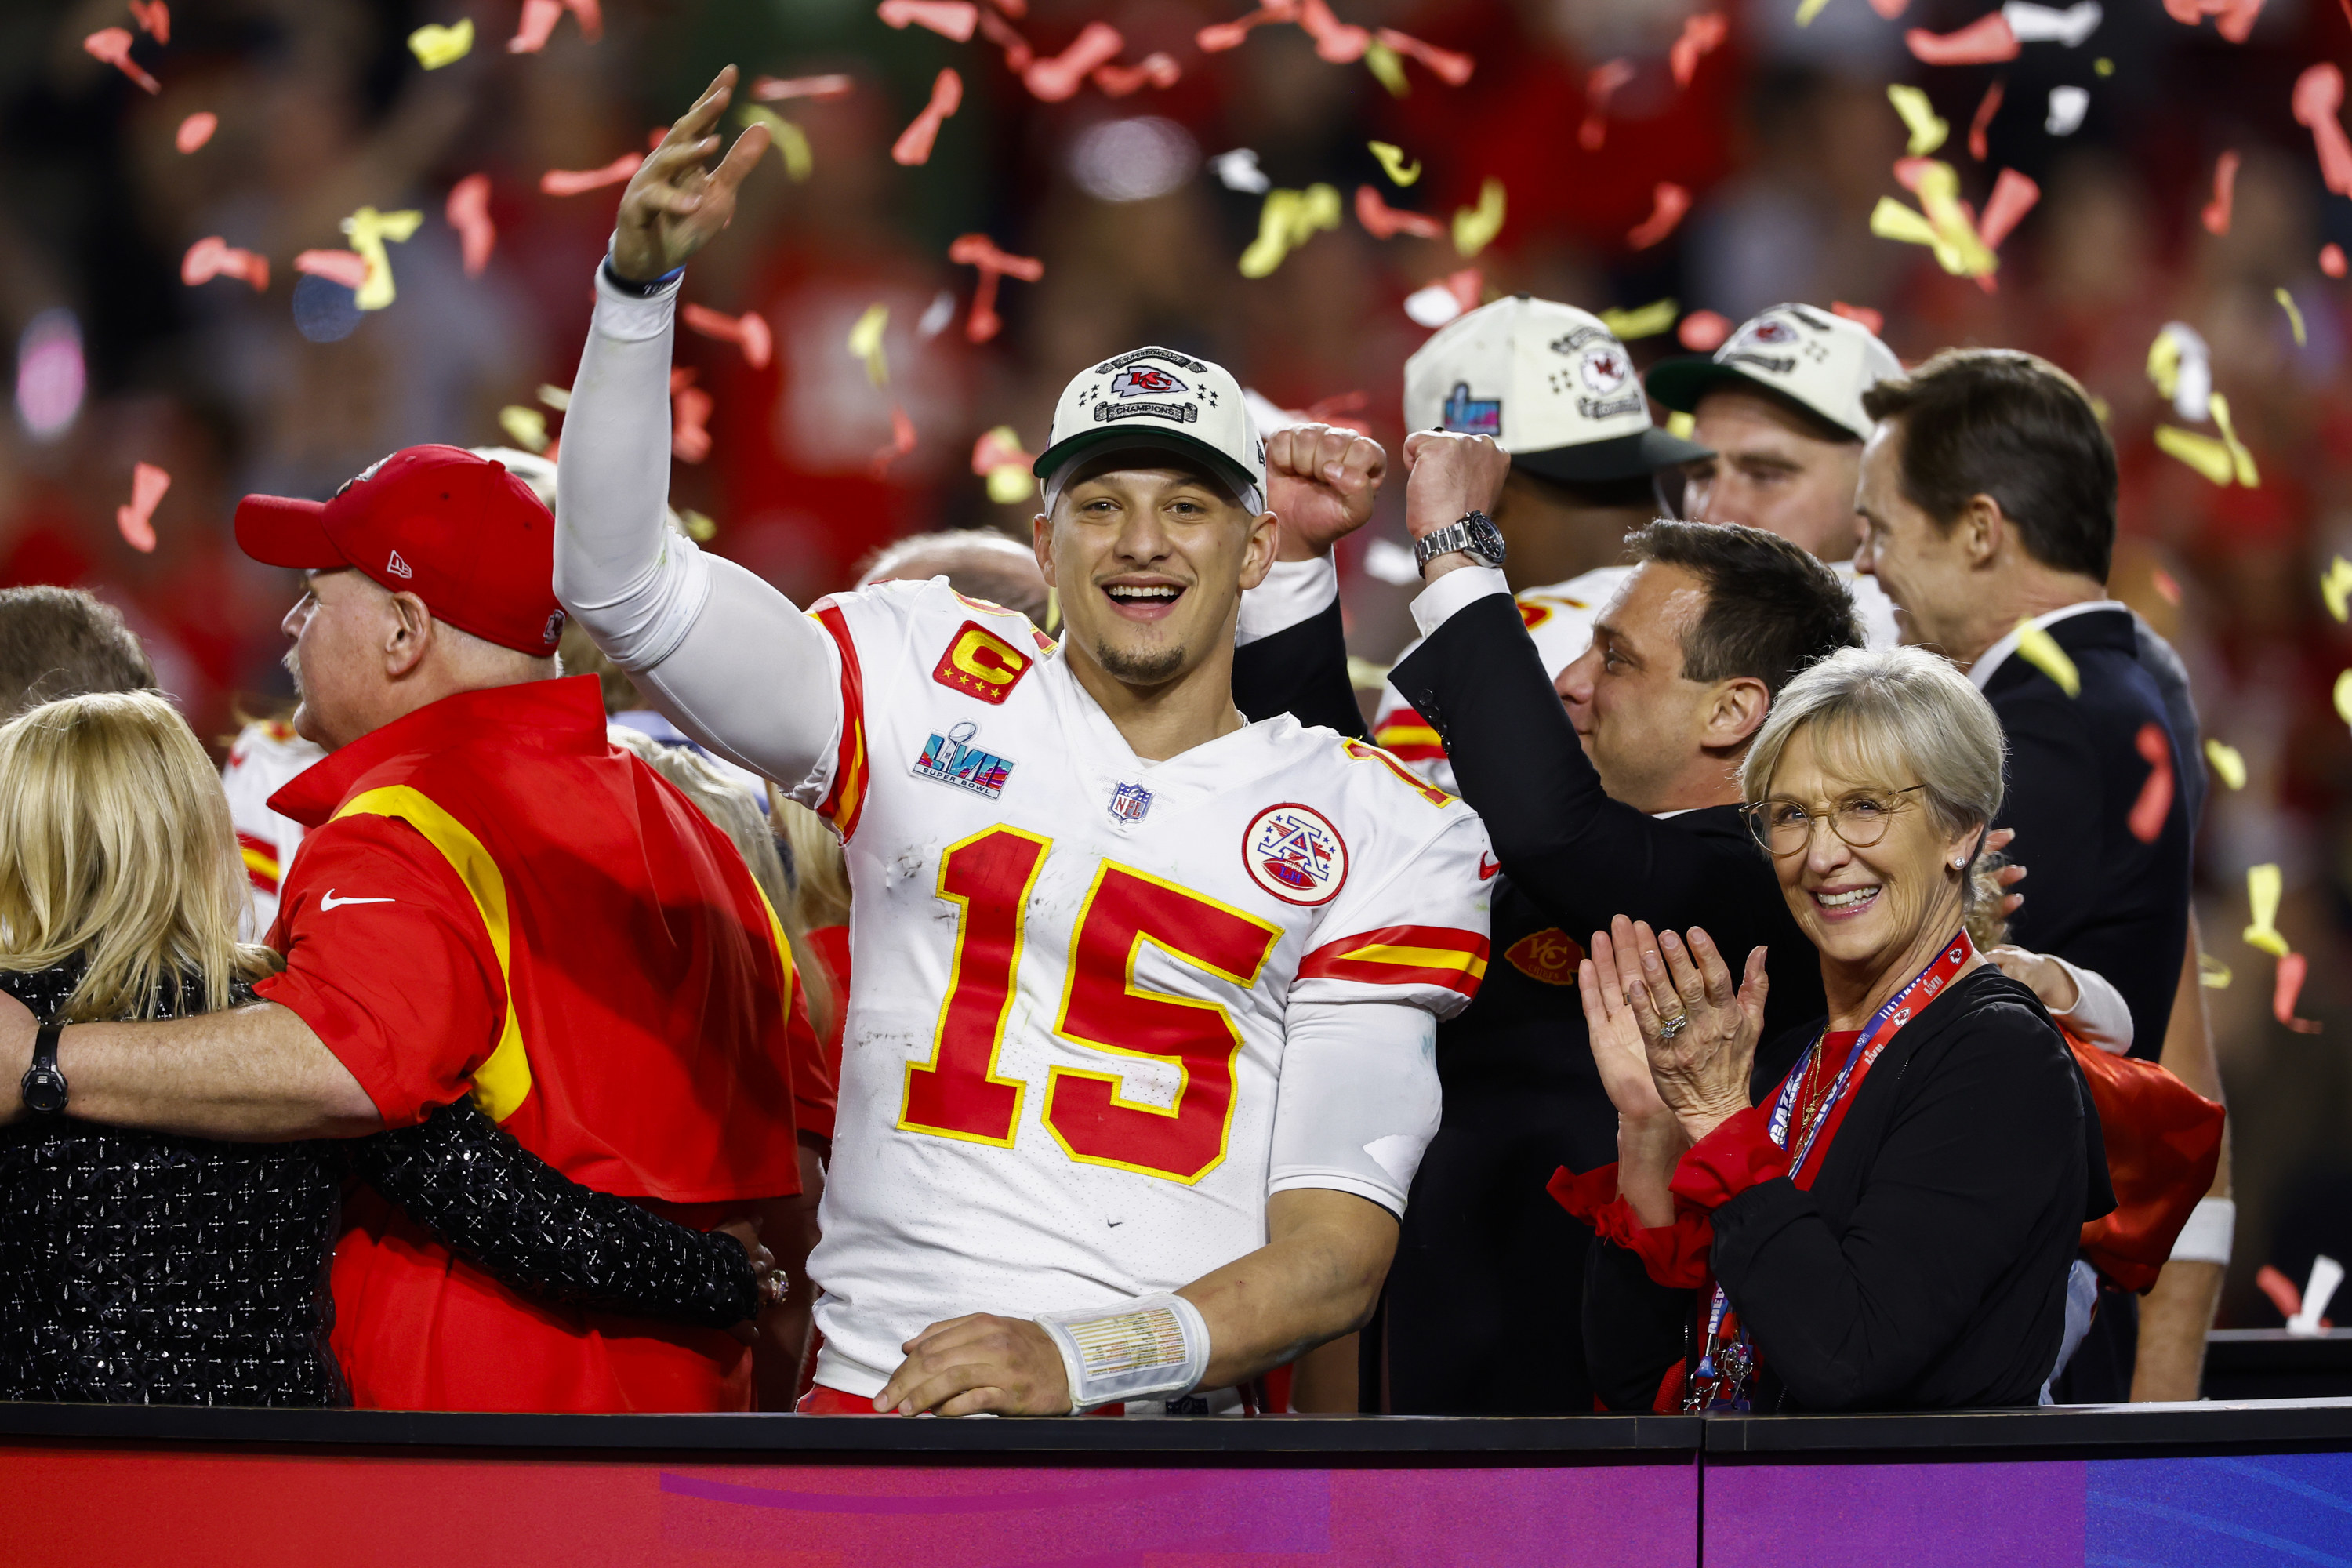 Patrick Mahomes of the Chiefs celebrating with others